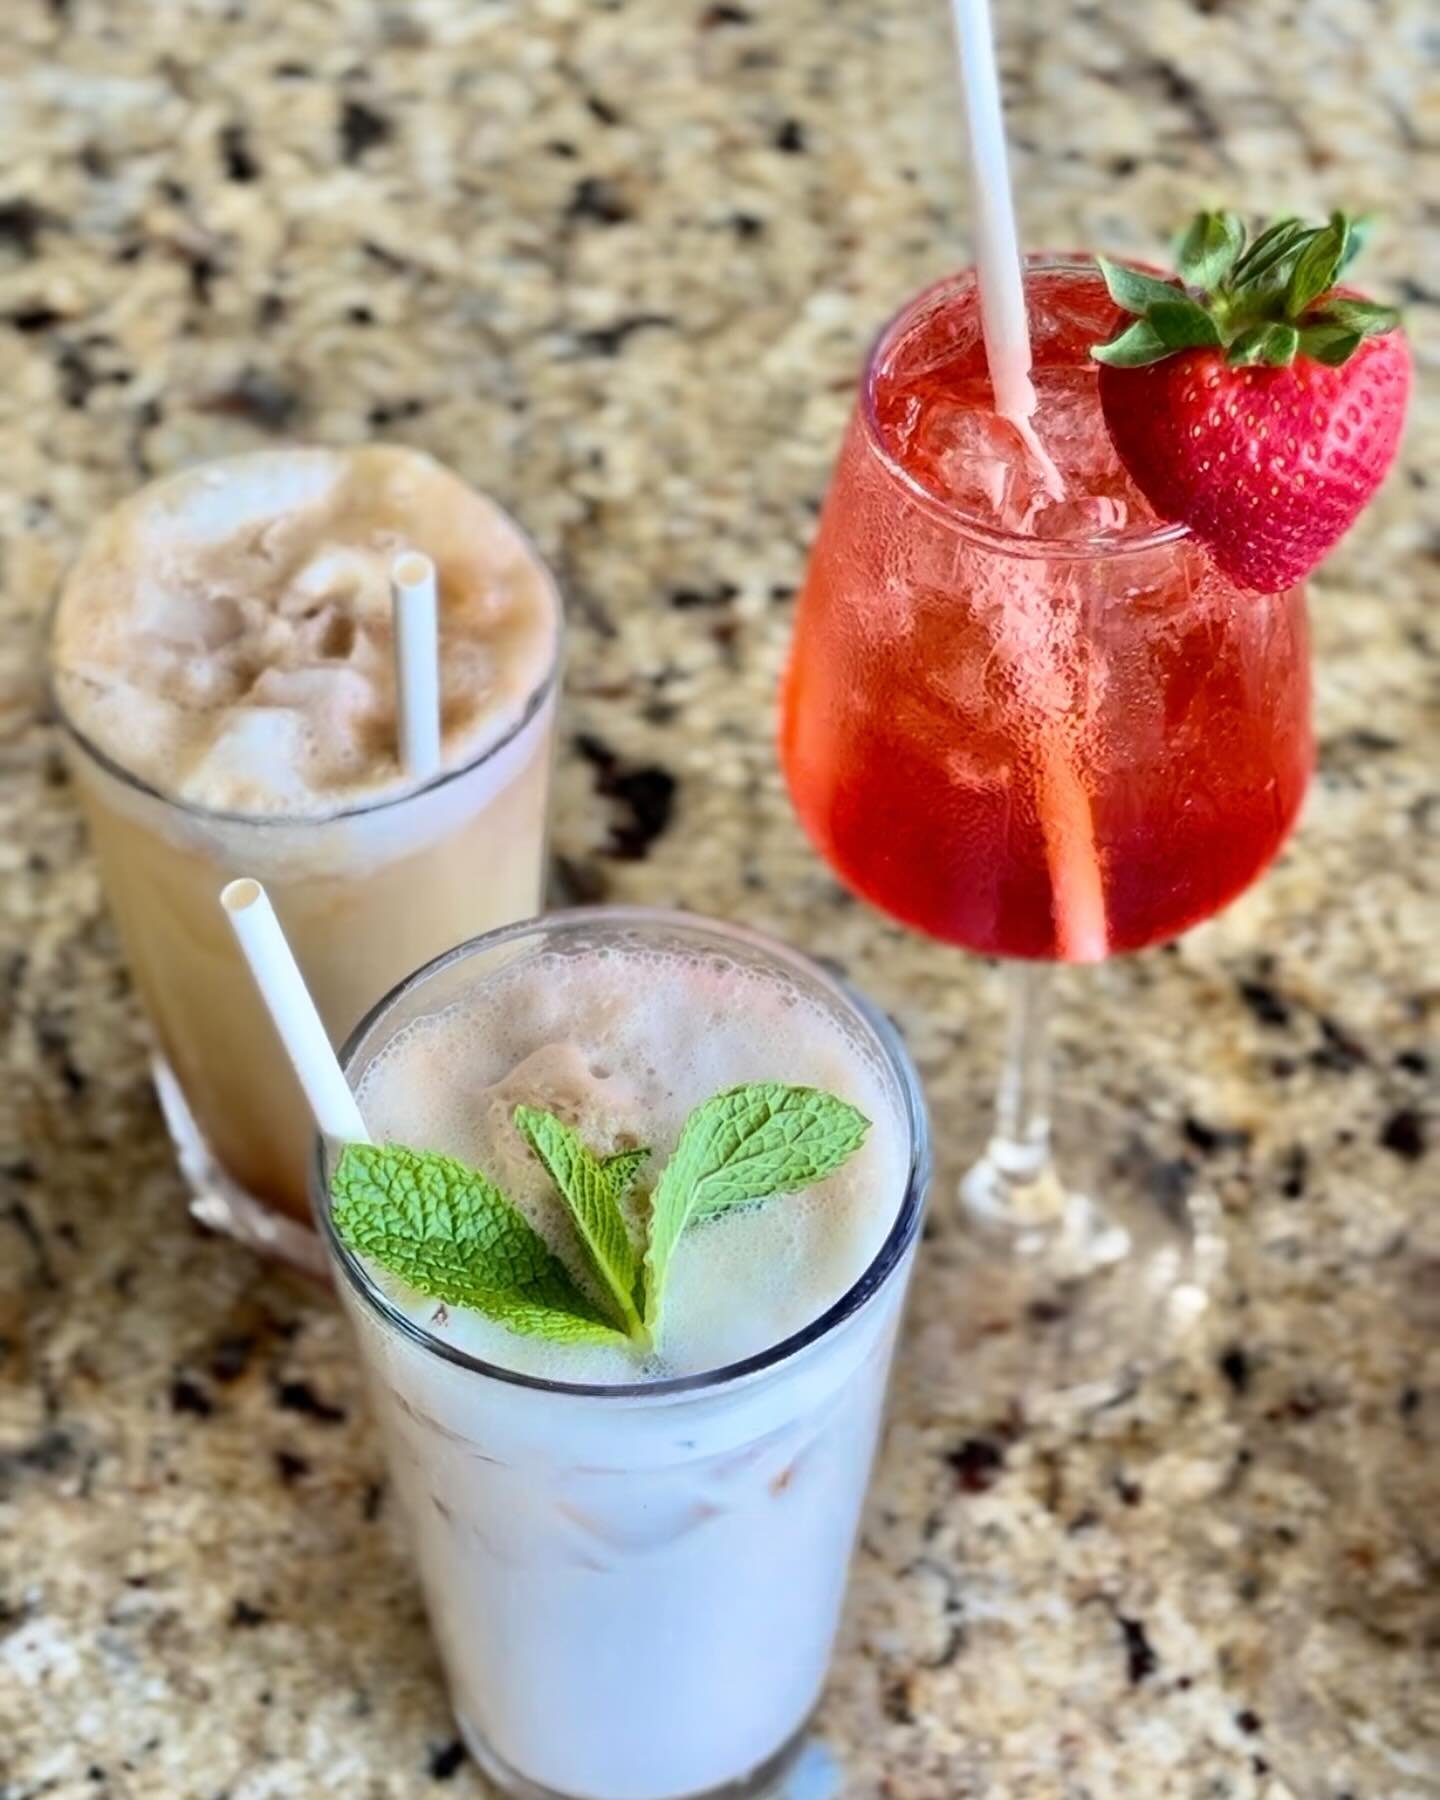 Our drink specials for tomorrows Burg Dogs Yappy Hour are delish! 🍹🍓 $1 from any of the Pet Pal Signature Drinks will go to @petpalanimalshelterstpete 💸Bring cash or there&rsquo;s an ATM in the lobby for the raffle! Good Luck &amp; Good Eats !😋🍔